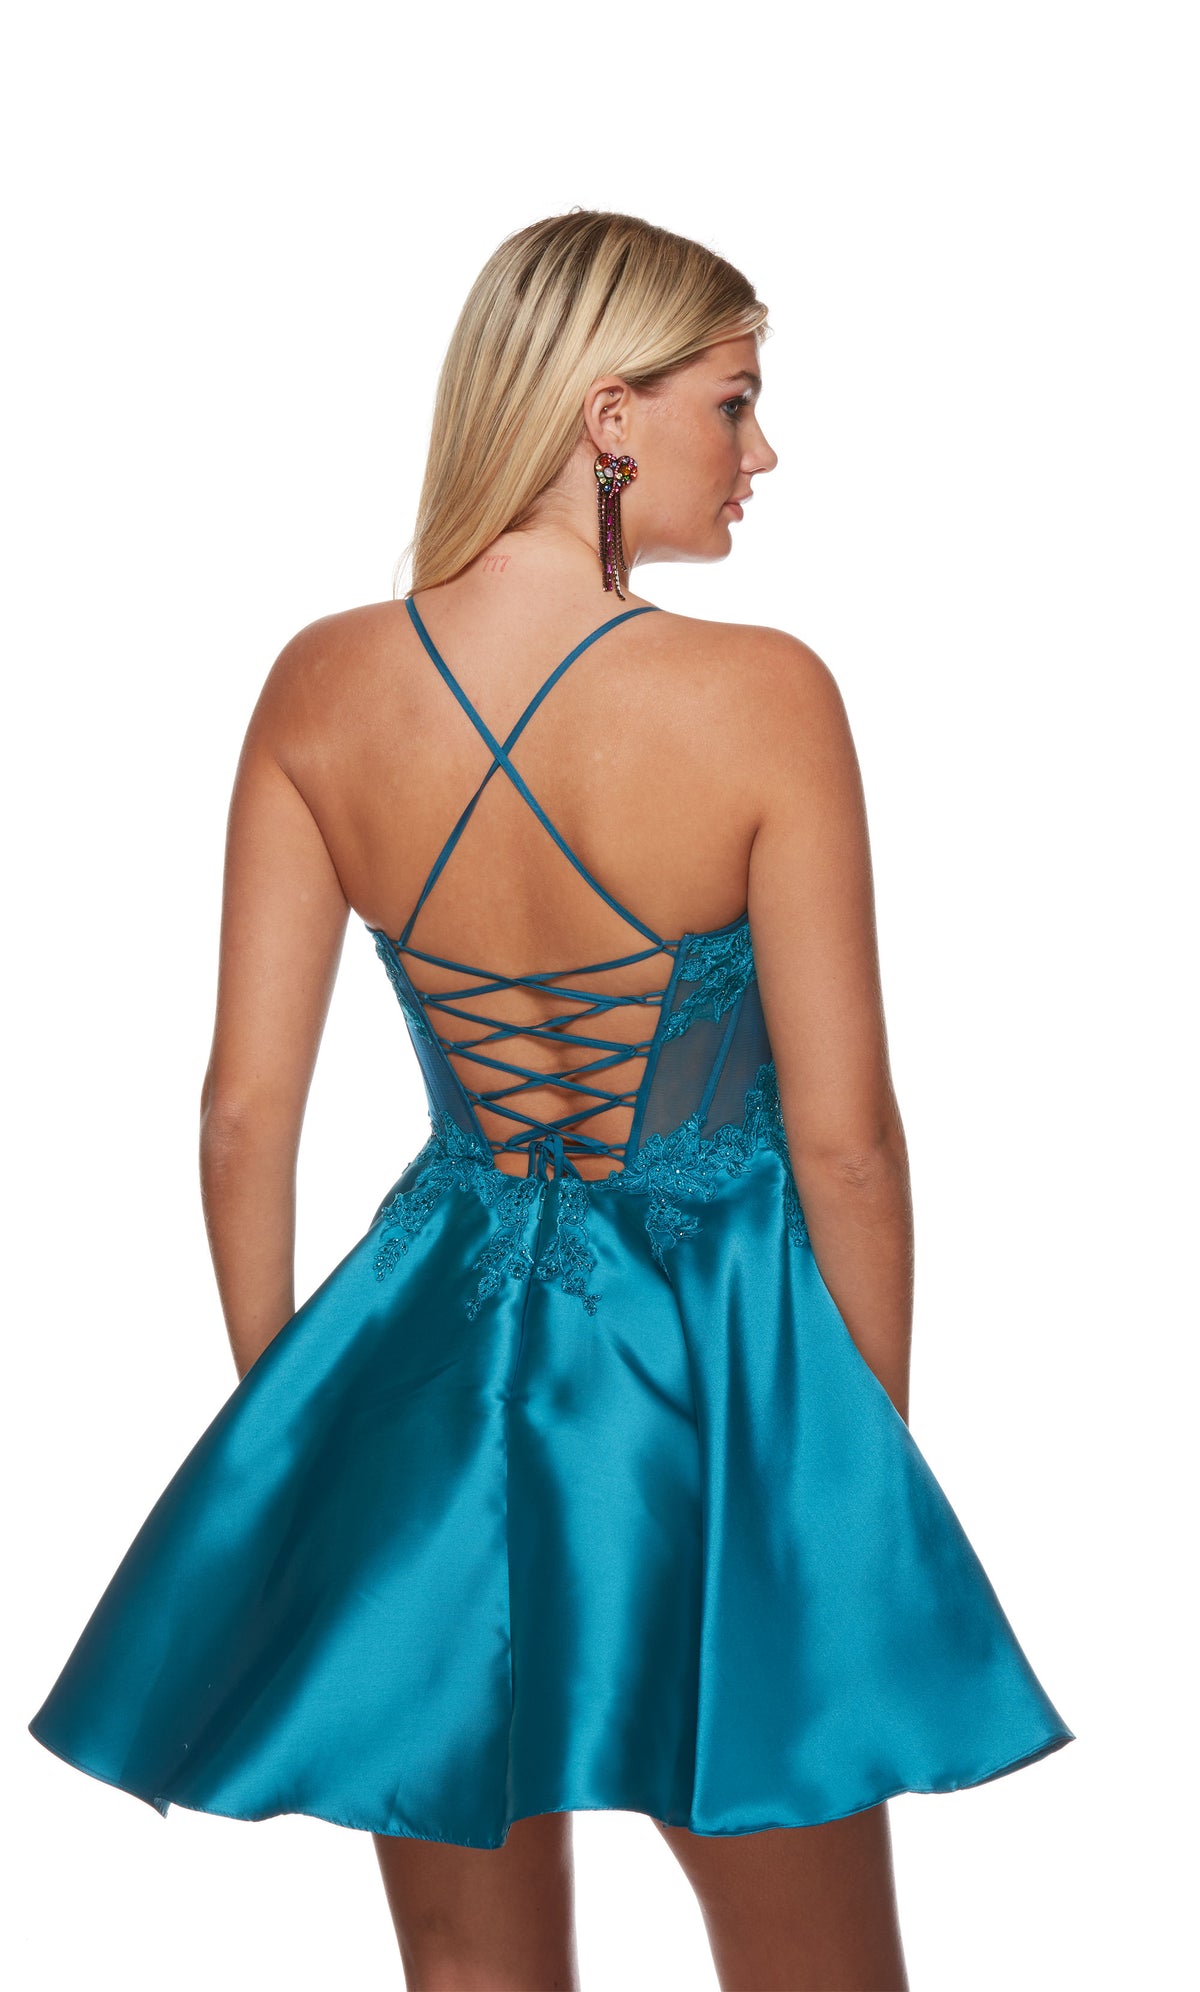 A teal blue, strappy lace up back corset dress with a sheer lace bodice and a flared A-line skirt.